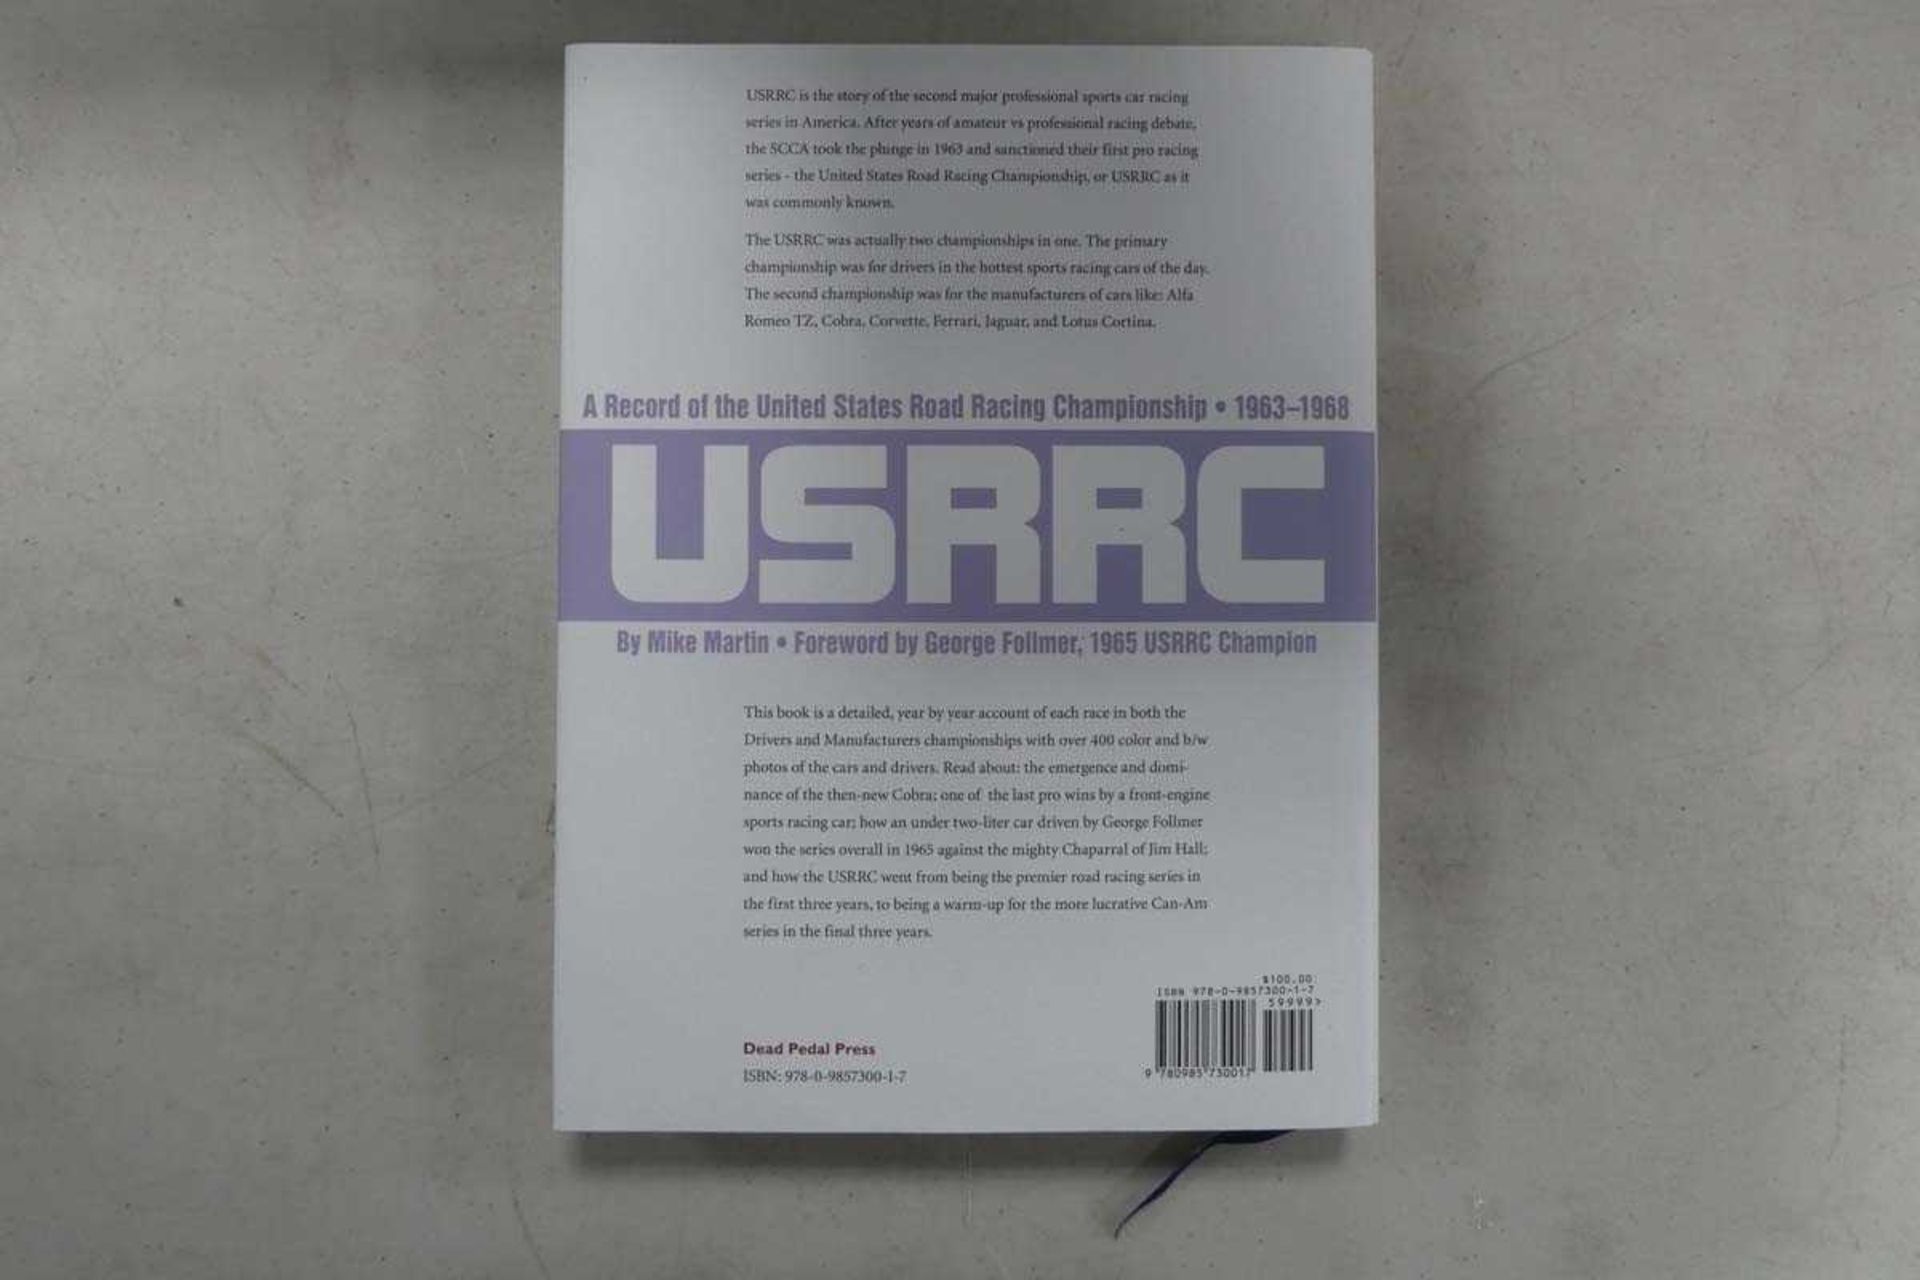 USRRC United States Record of Road Racing Championships 1963-1968 by Mike Martin as published by - Image 3 of 4